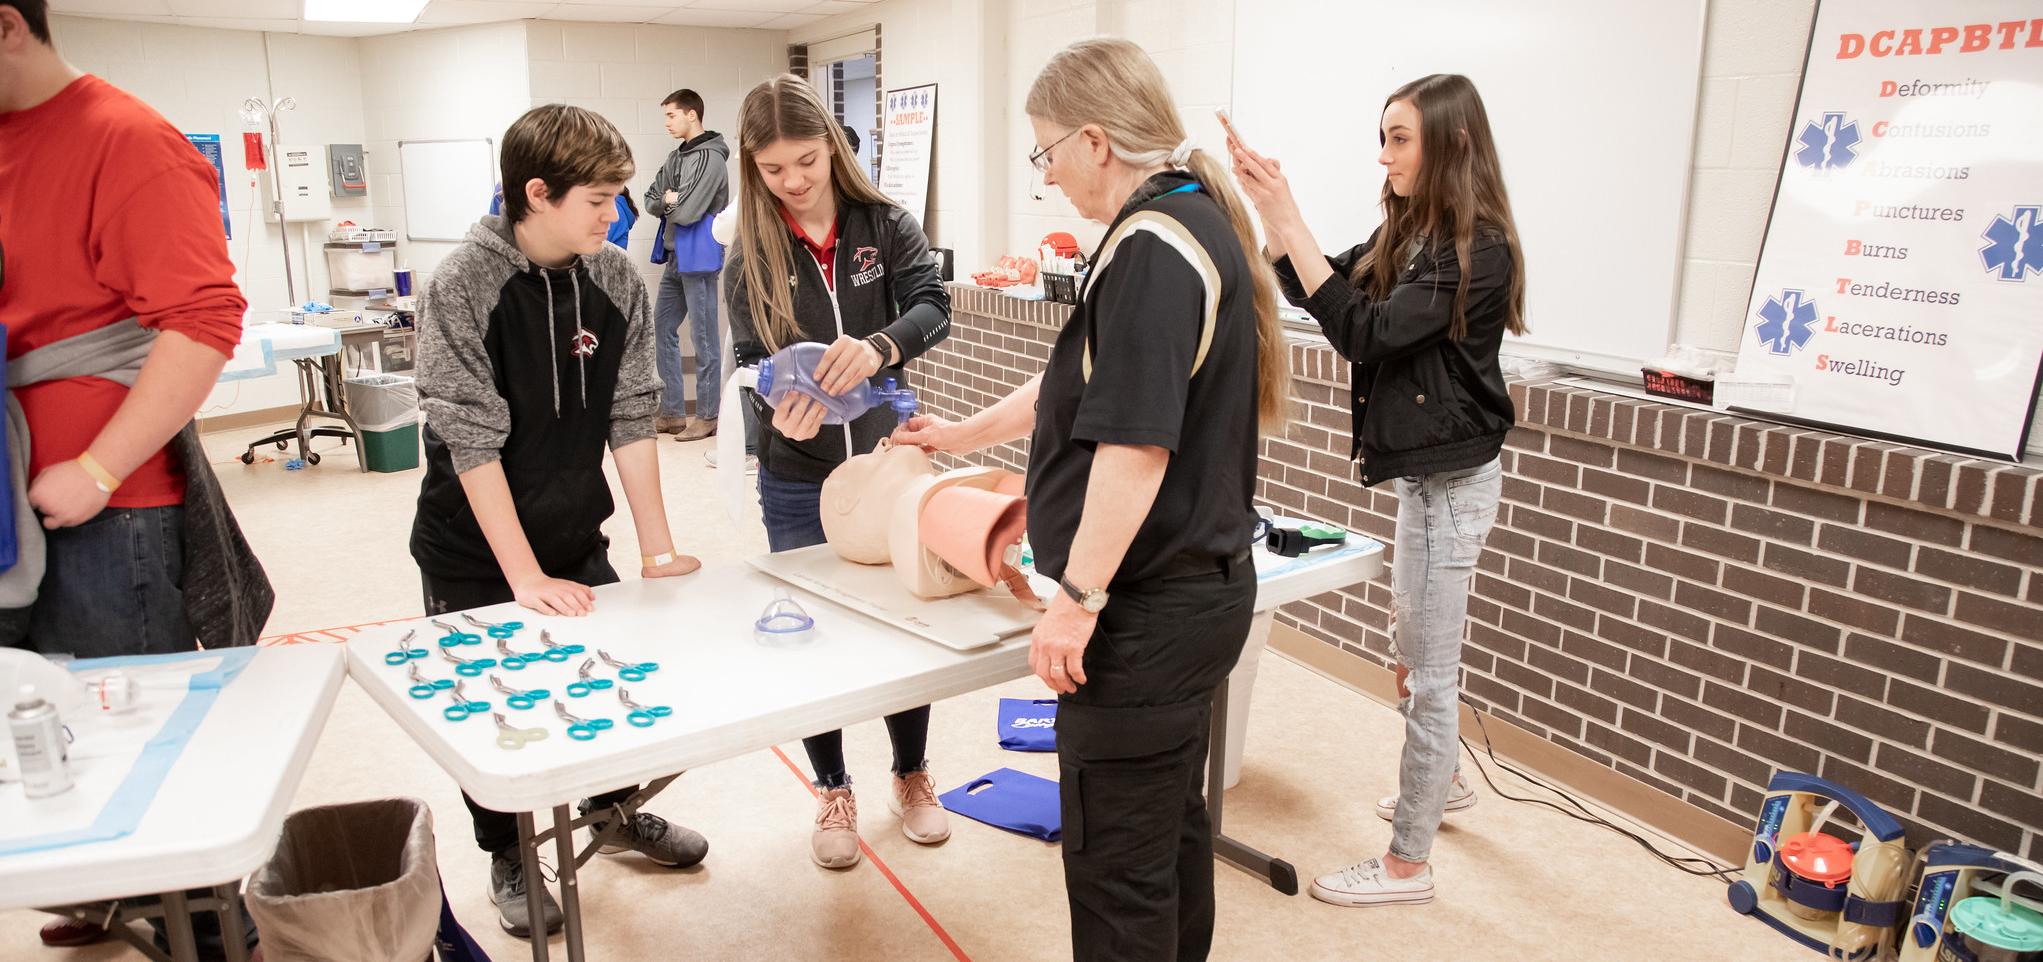 Students learn skills at Career Day